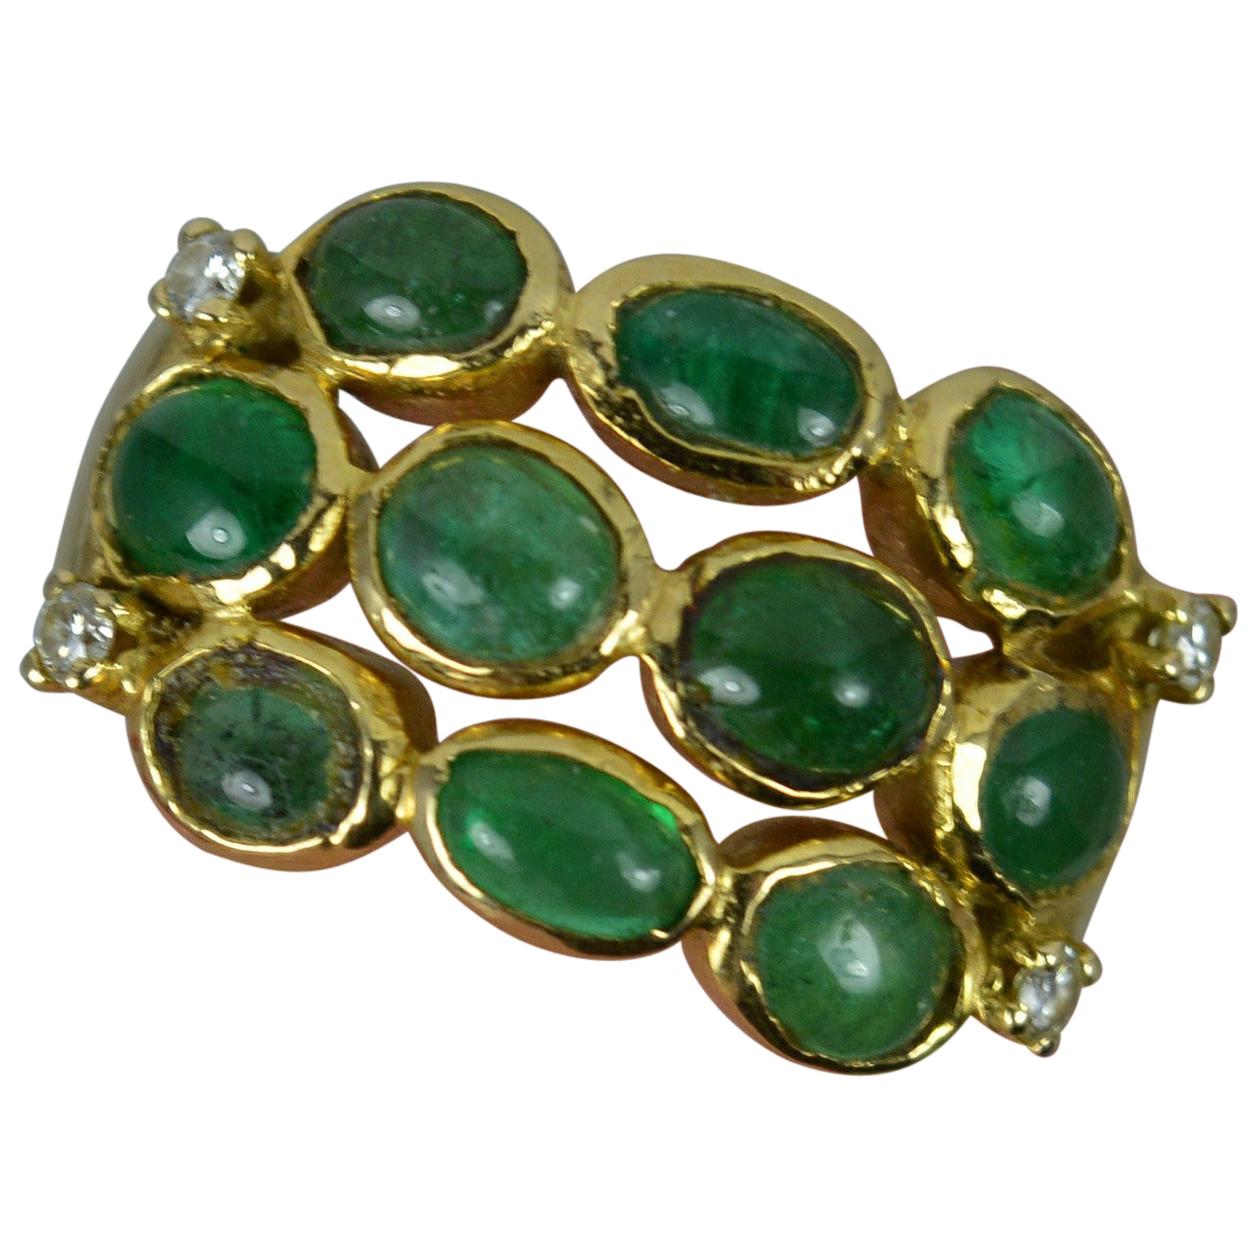 2.65ct Emerald Cabochon and 18ct Gold Cluster Band Ring